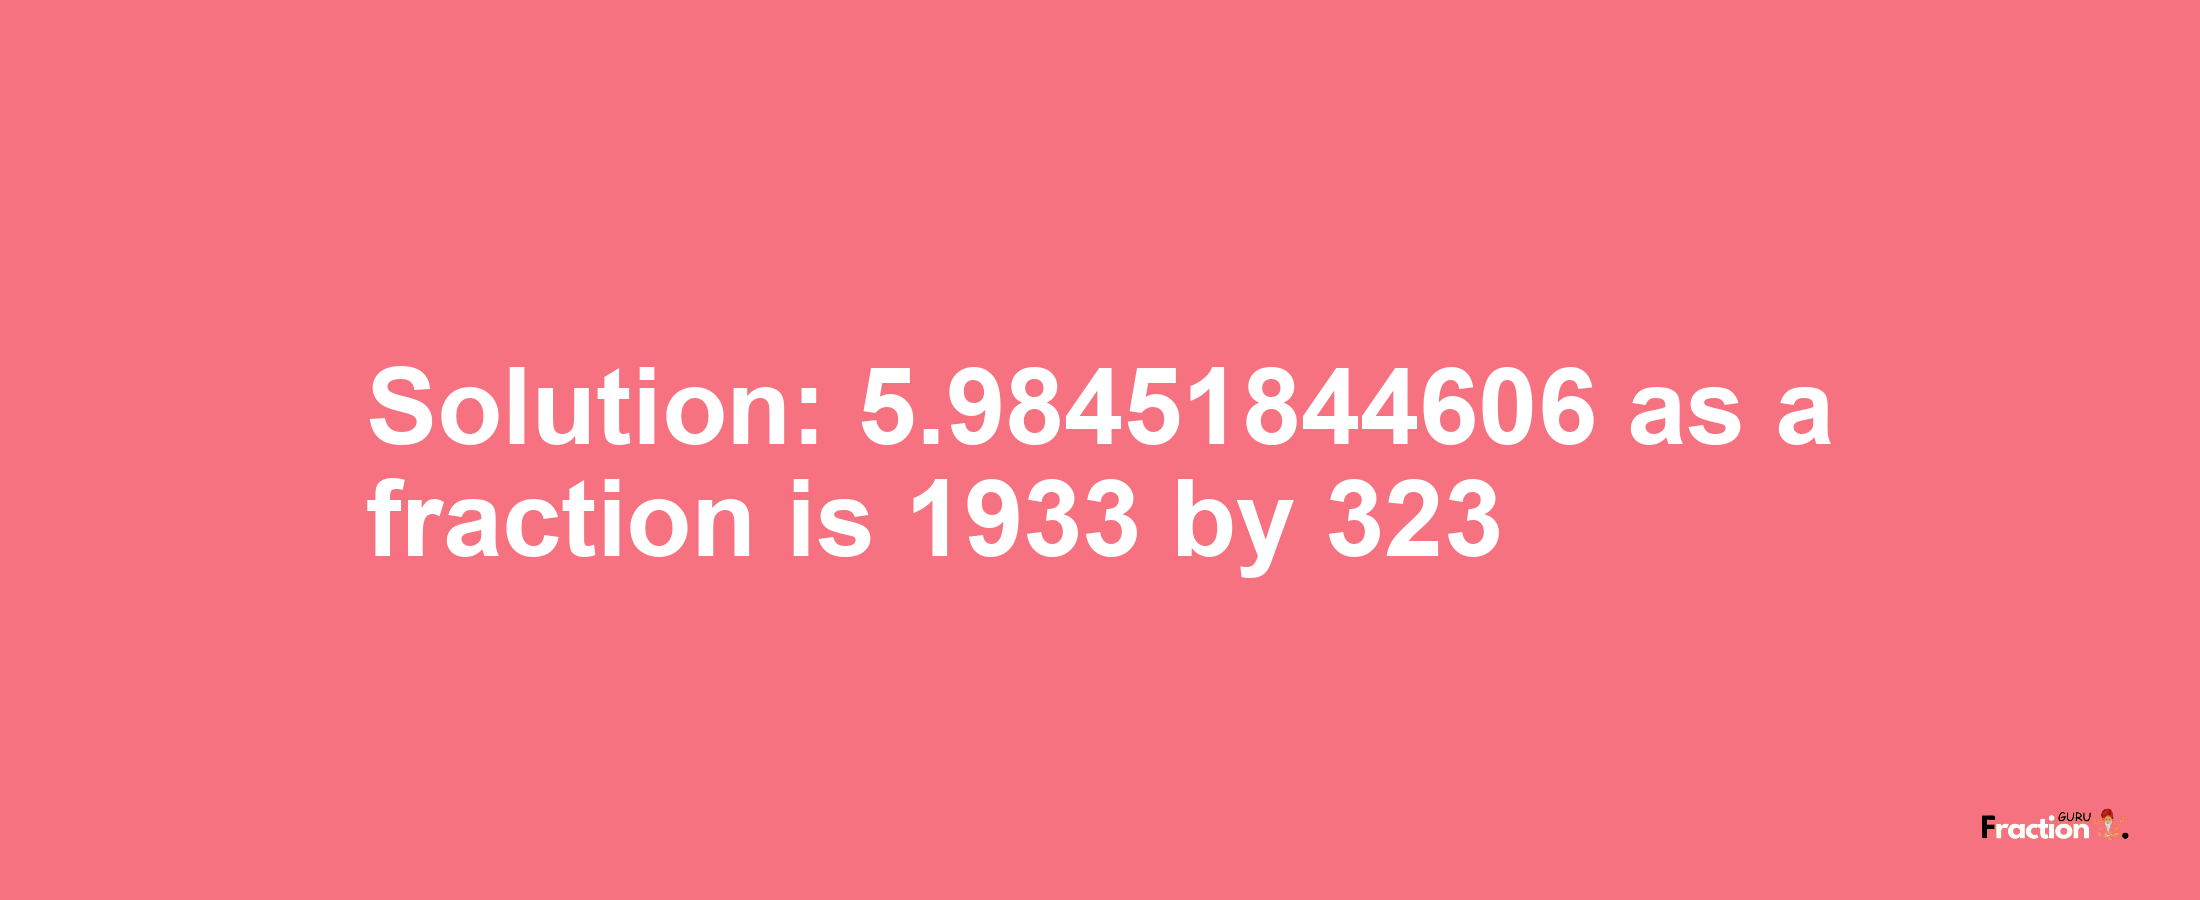 Solution:5.98451844606 as a fraction is 1933/323